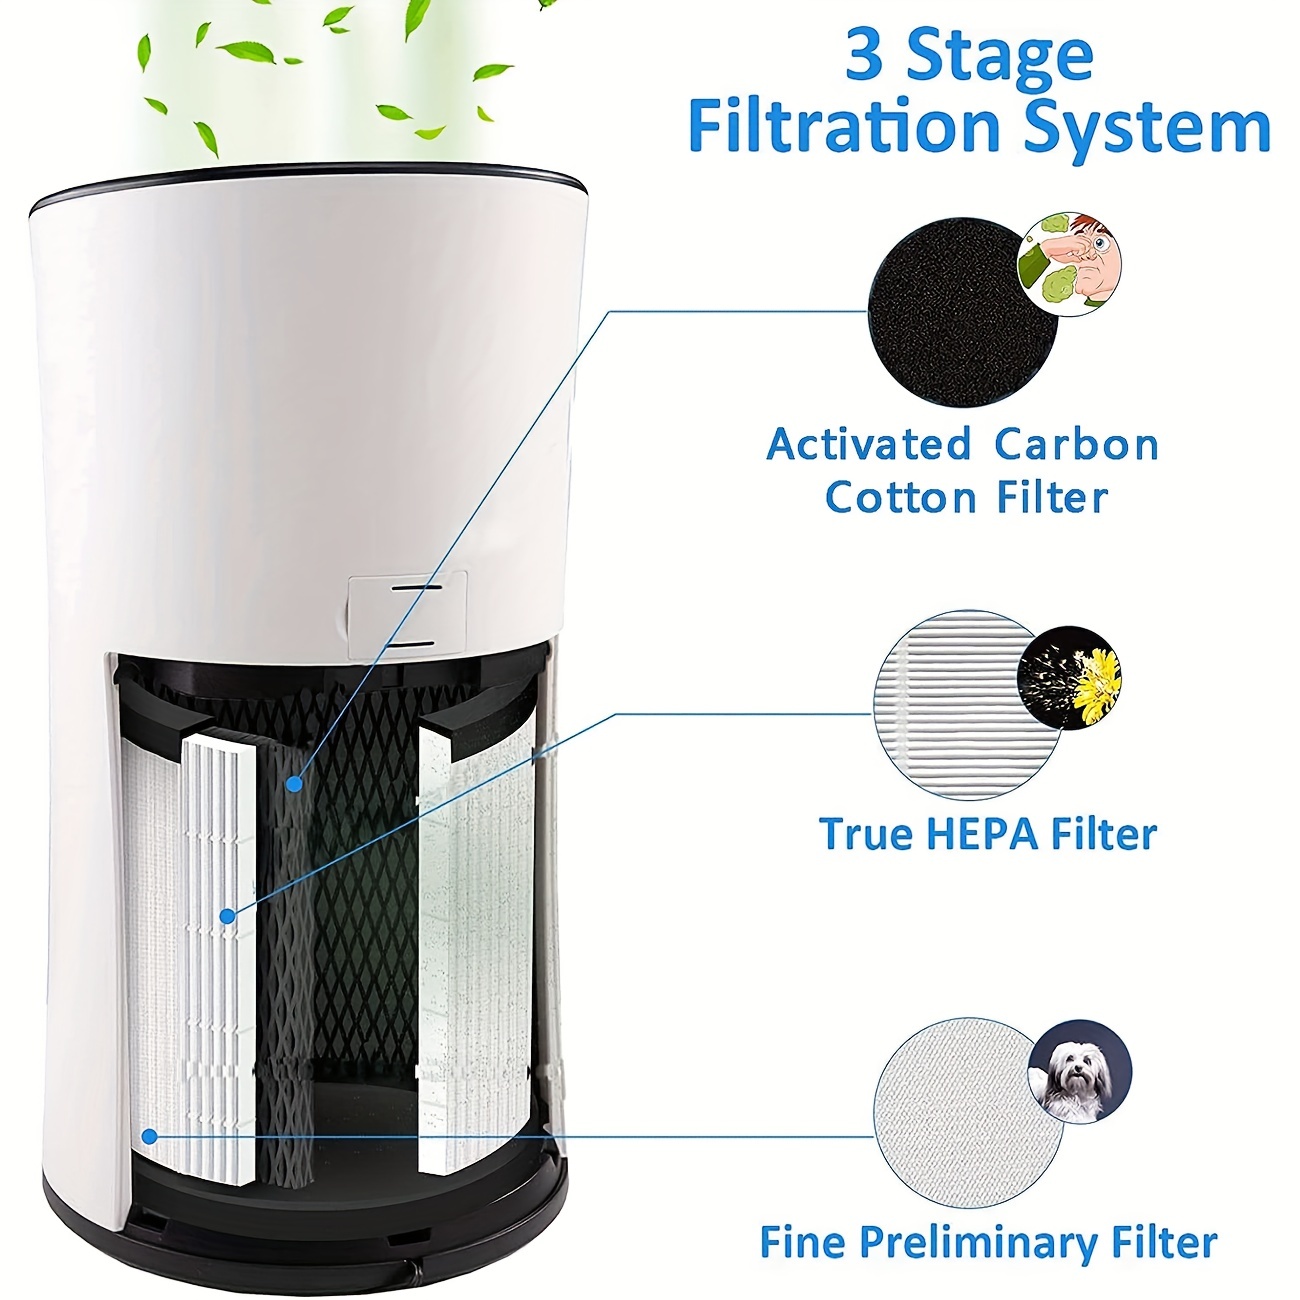 Levoit Air Purifier Filtration with True HEPA Filter, Compact Odor